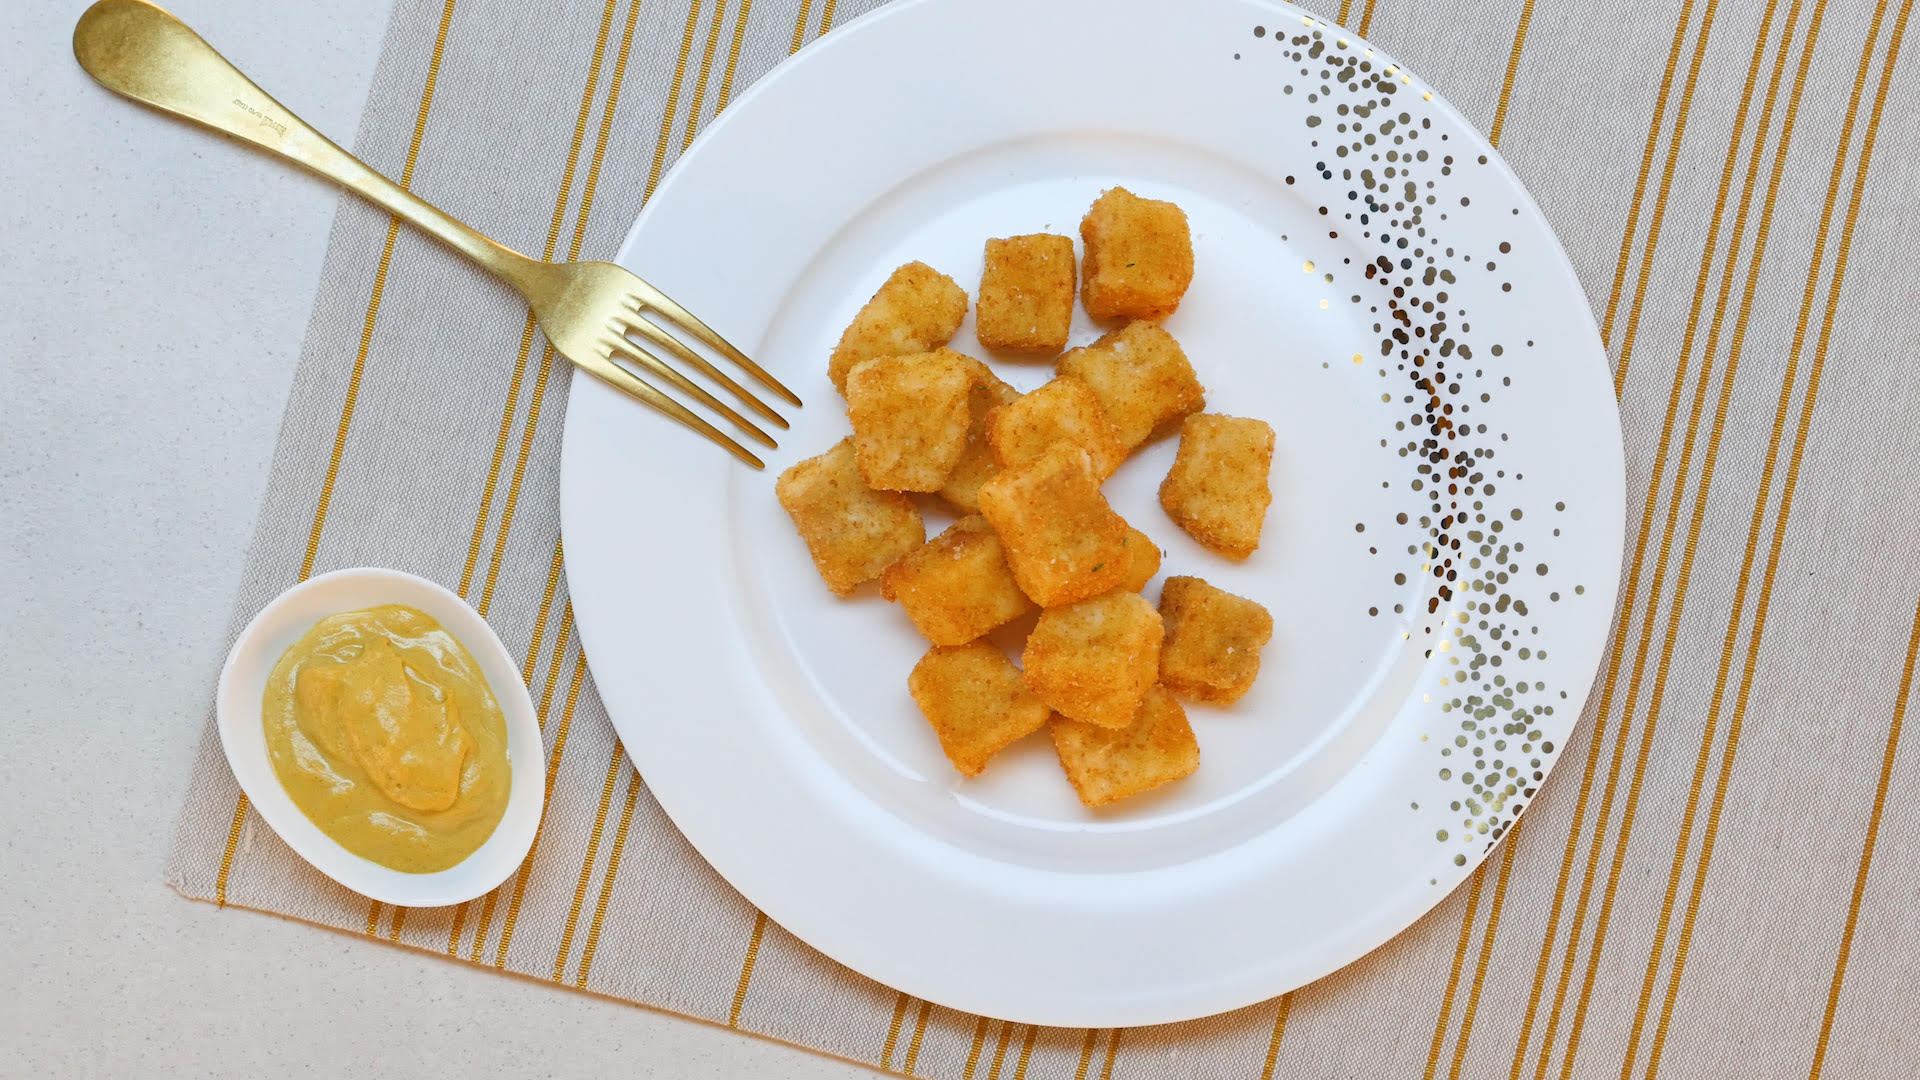 Fried cod with mustard sauce